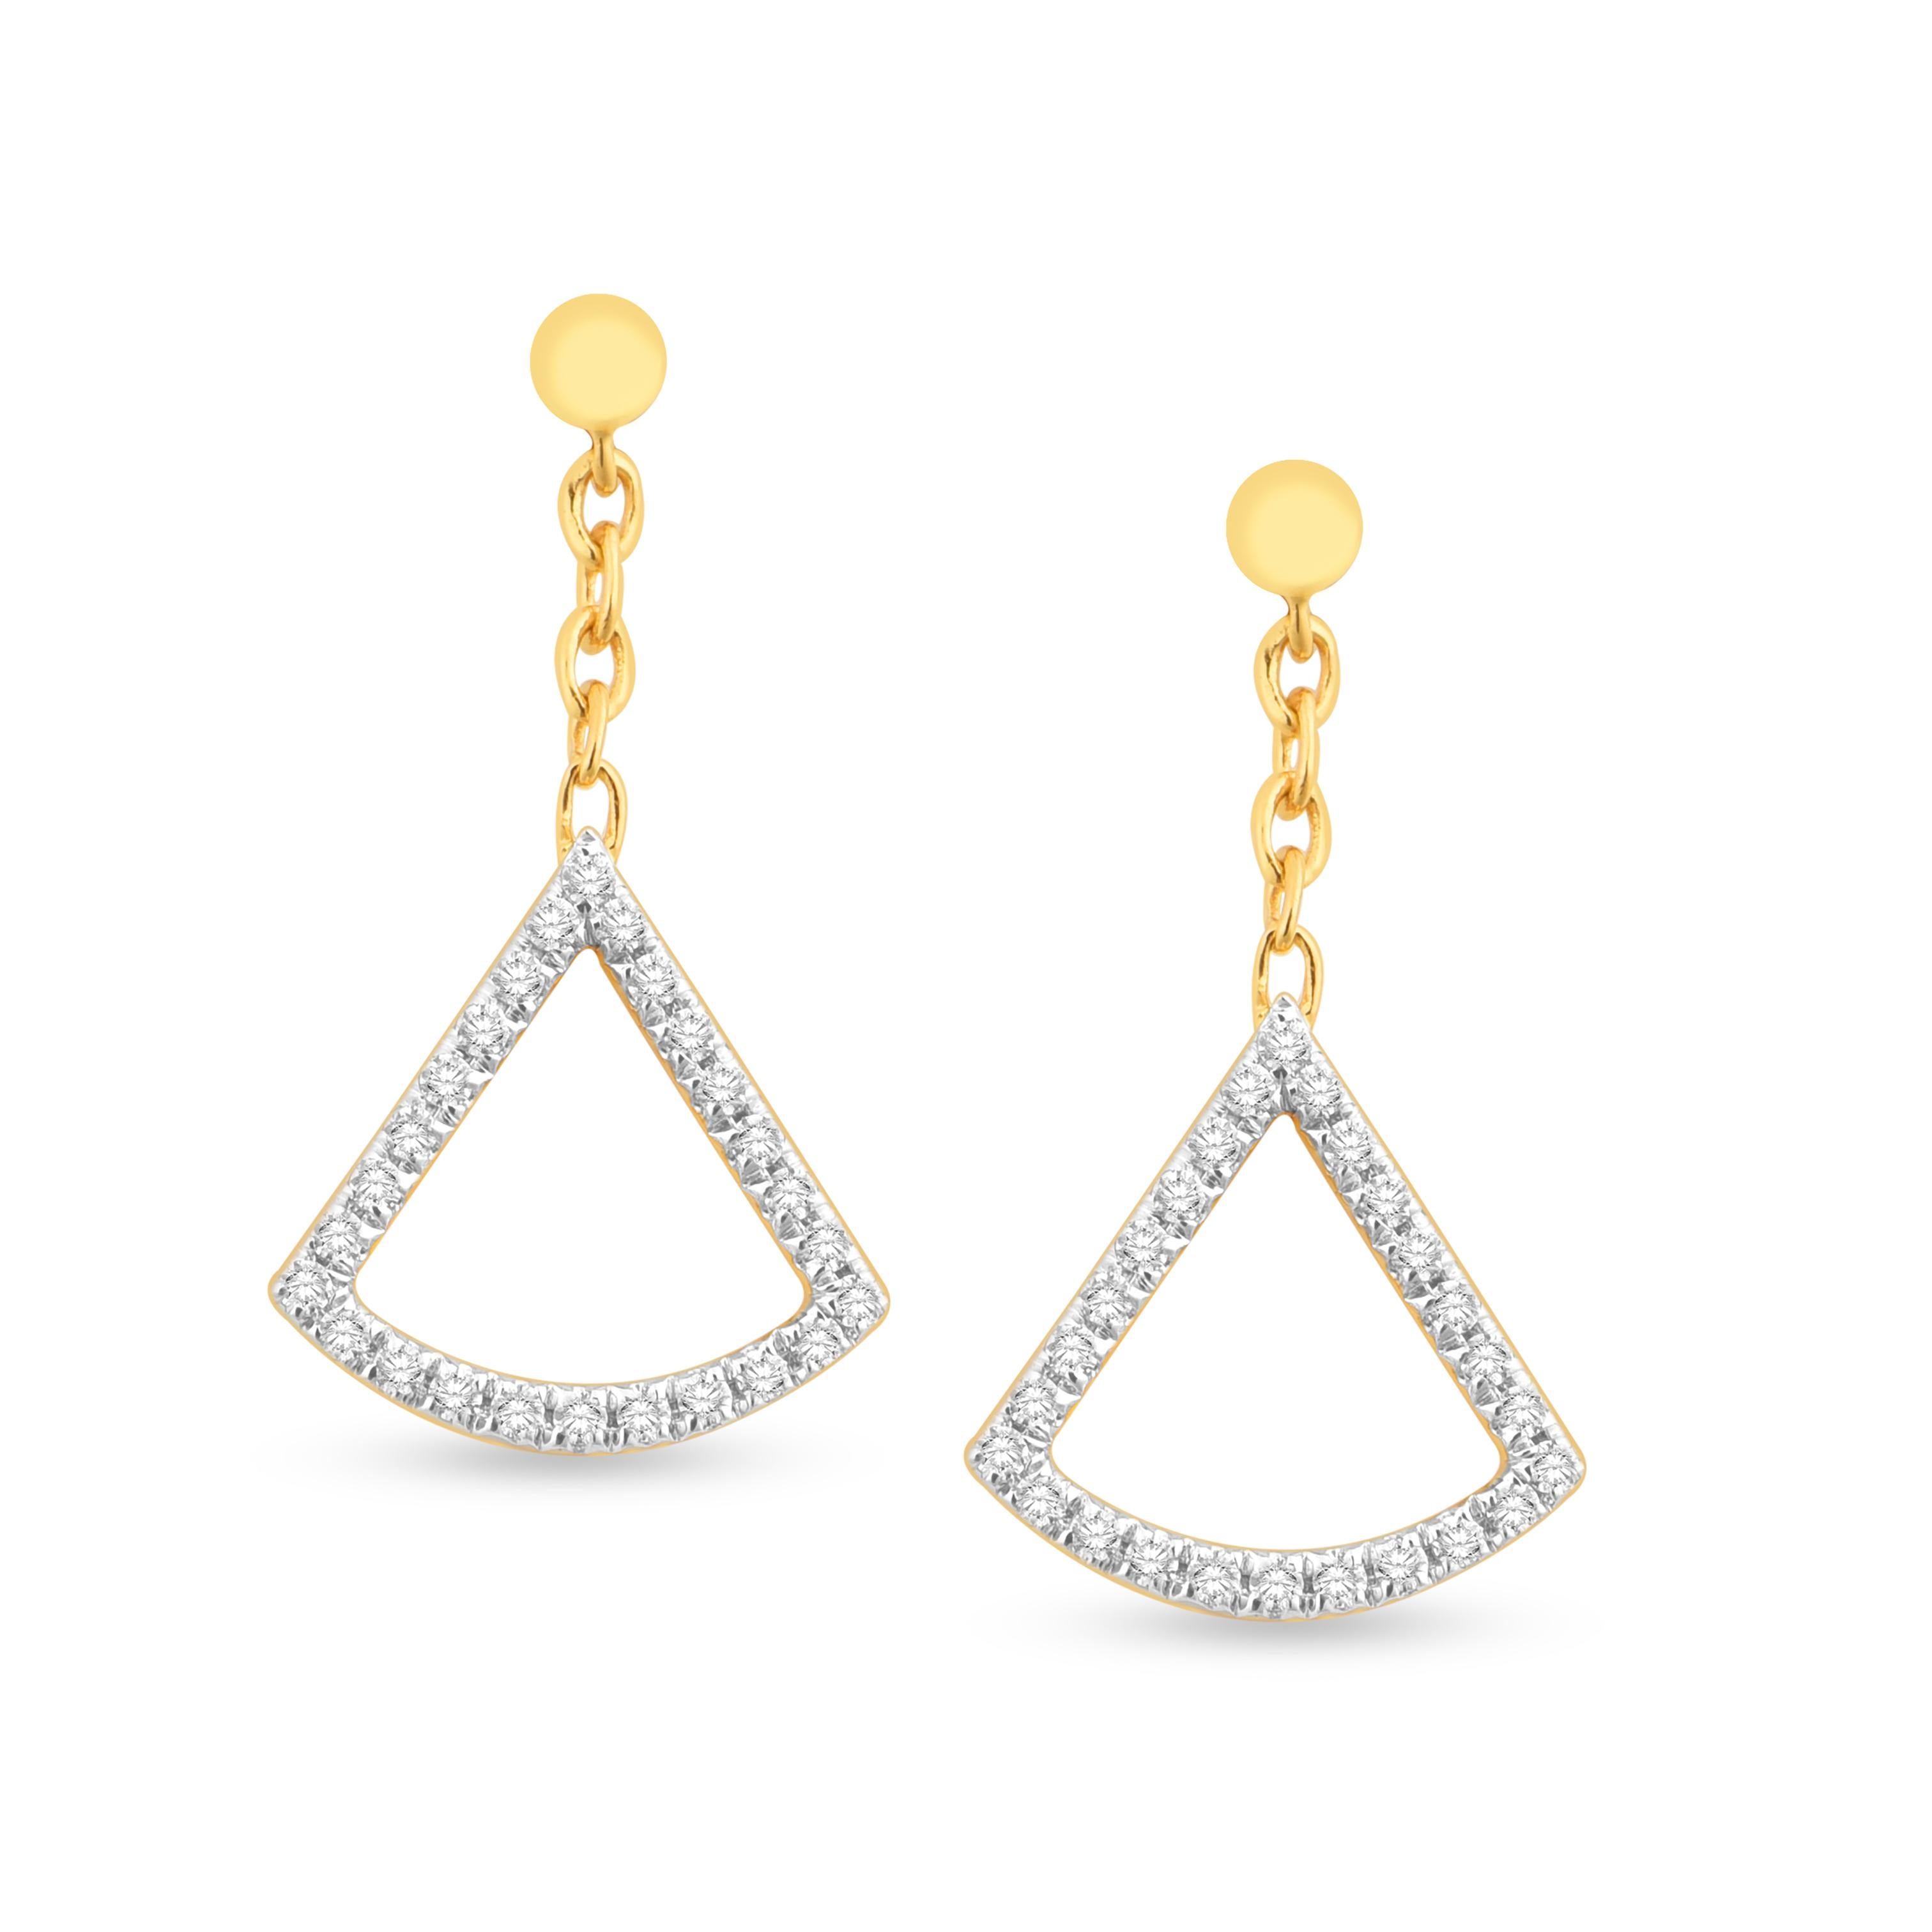 These dangling diamond earrings are inspired by the fan shaped leaves of the Ginkgo tree. These unique earrings are available of 14K Yellow Gold and 14K White Gold.

14K White Gold Dangling Diamond Earrings
Diamond weight: 0.23 ct total weight